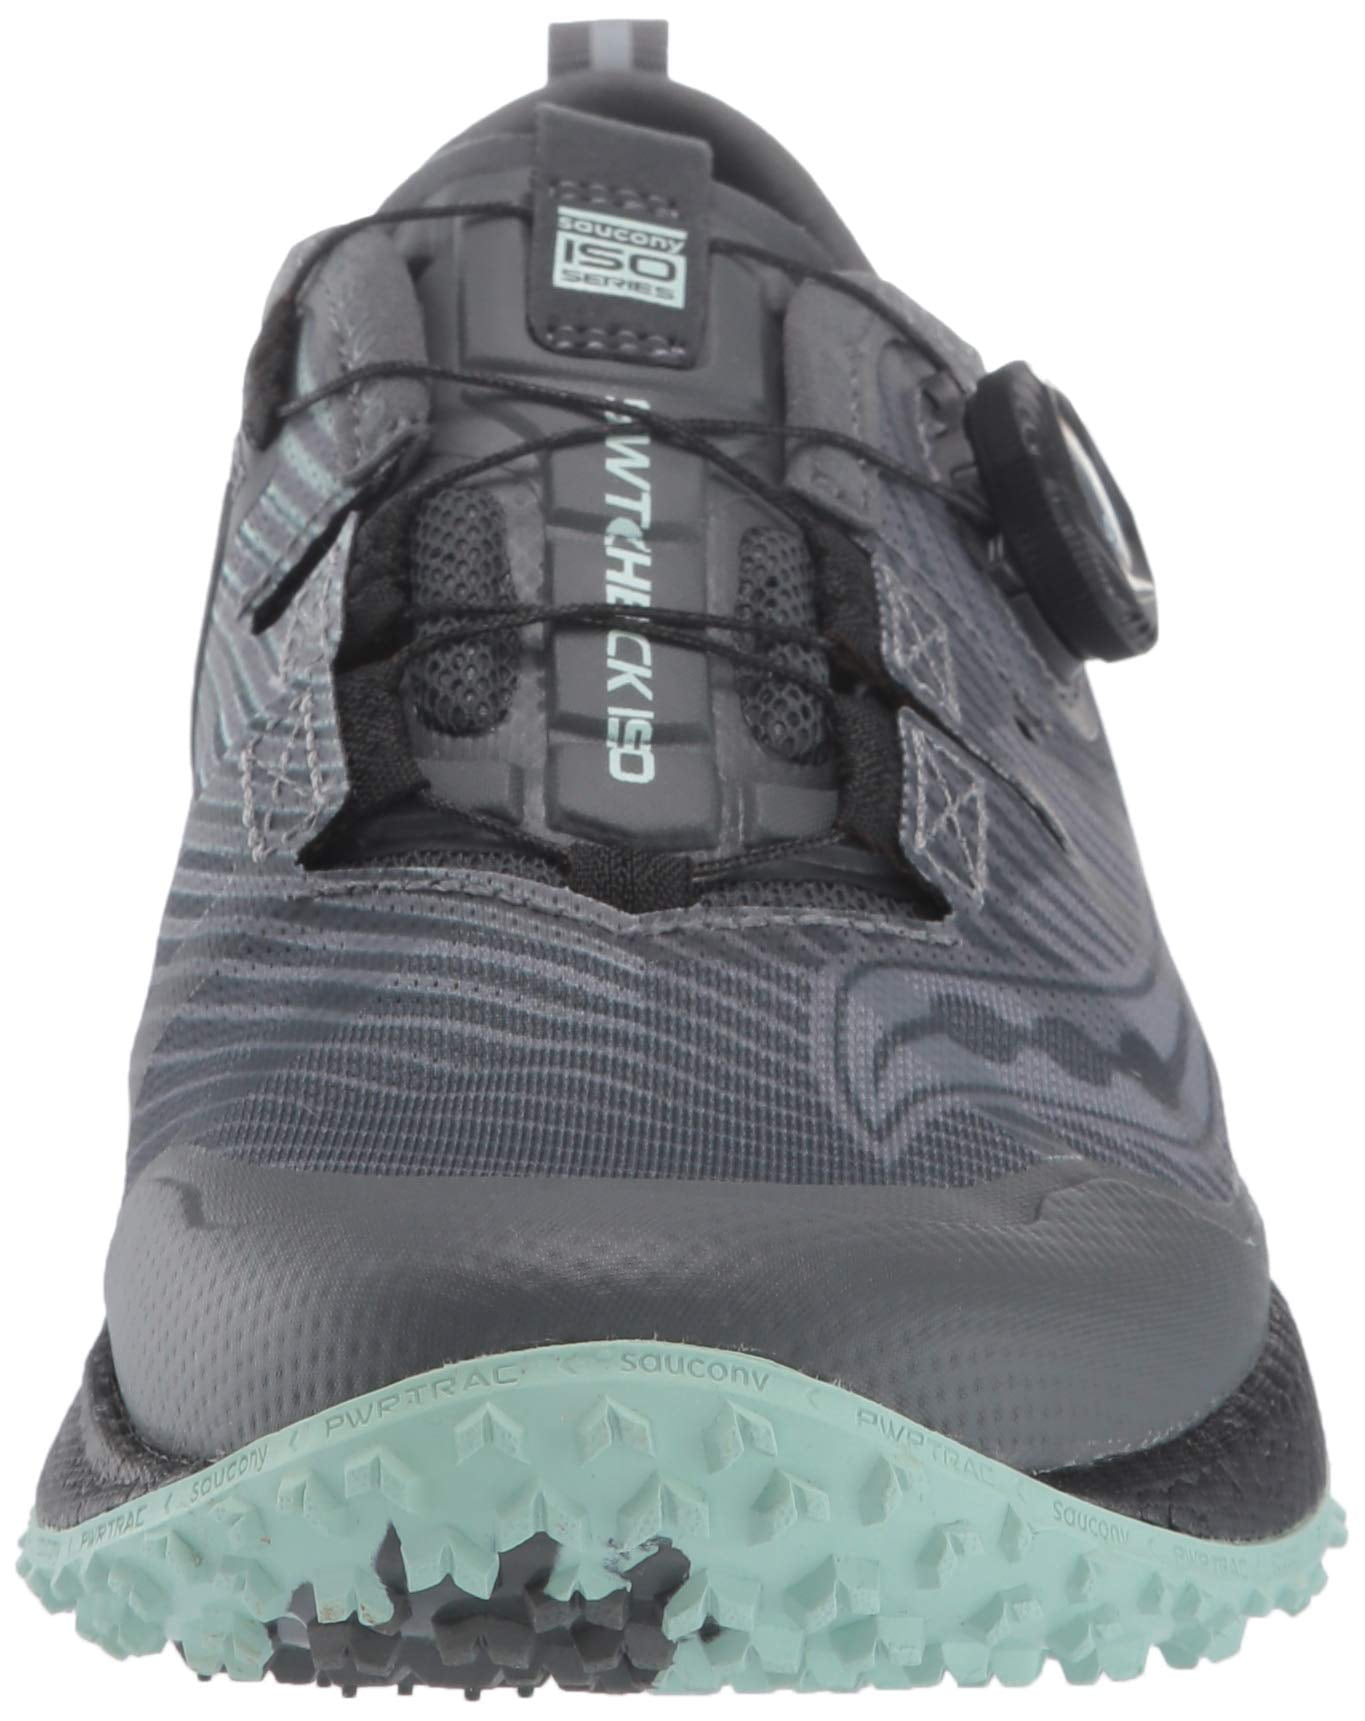 Saucony Womens Switchback ISO Trail Running Shoe Grey/Mint, 54% OFF